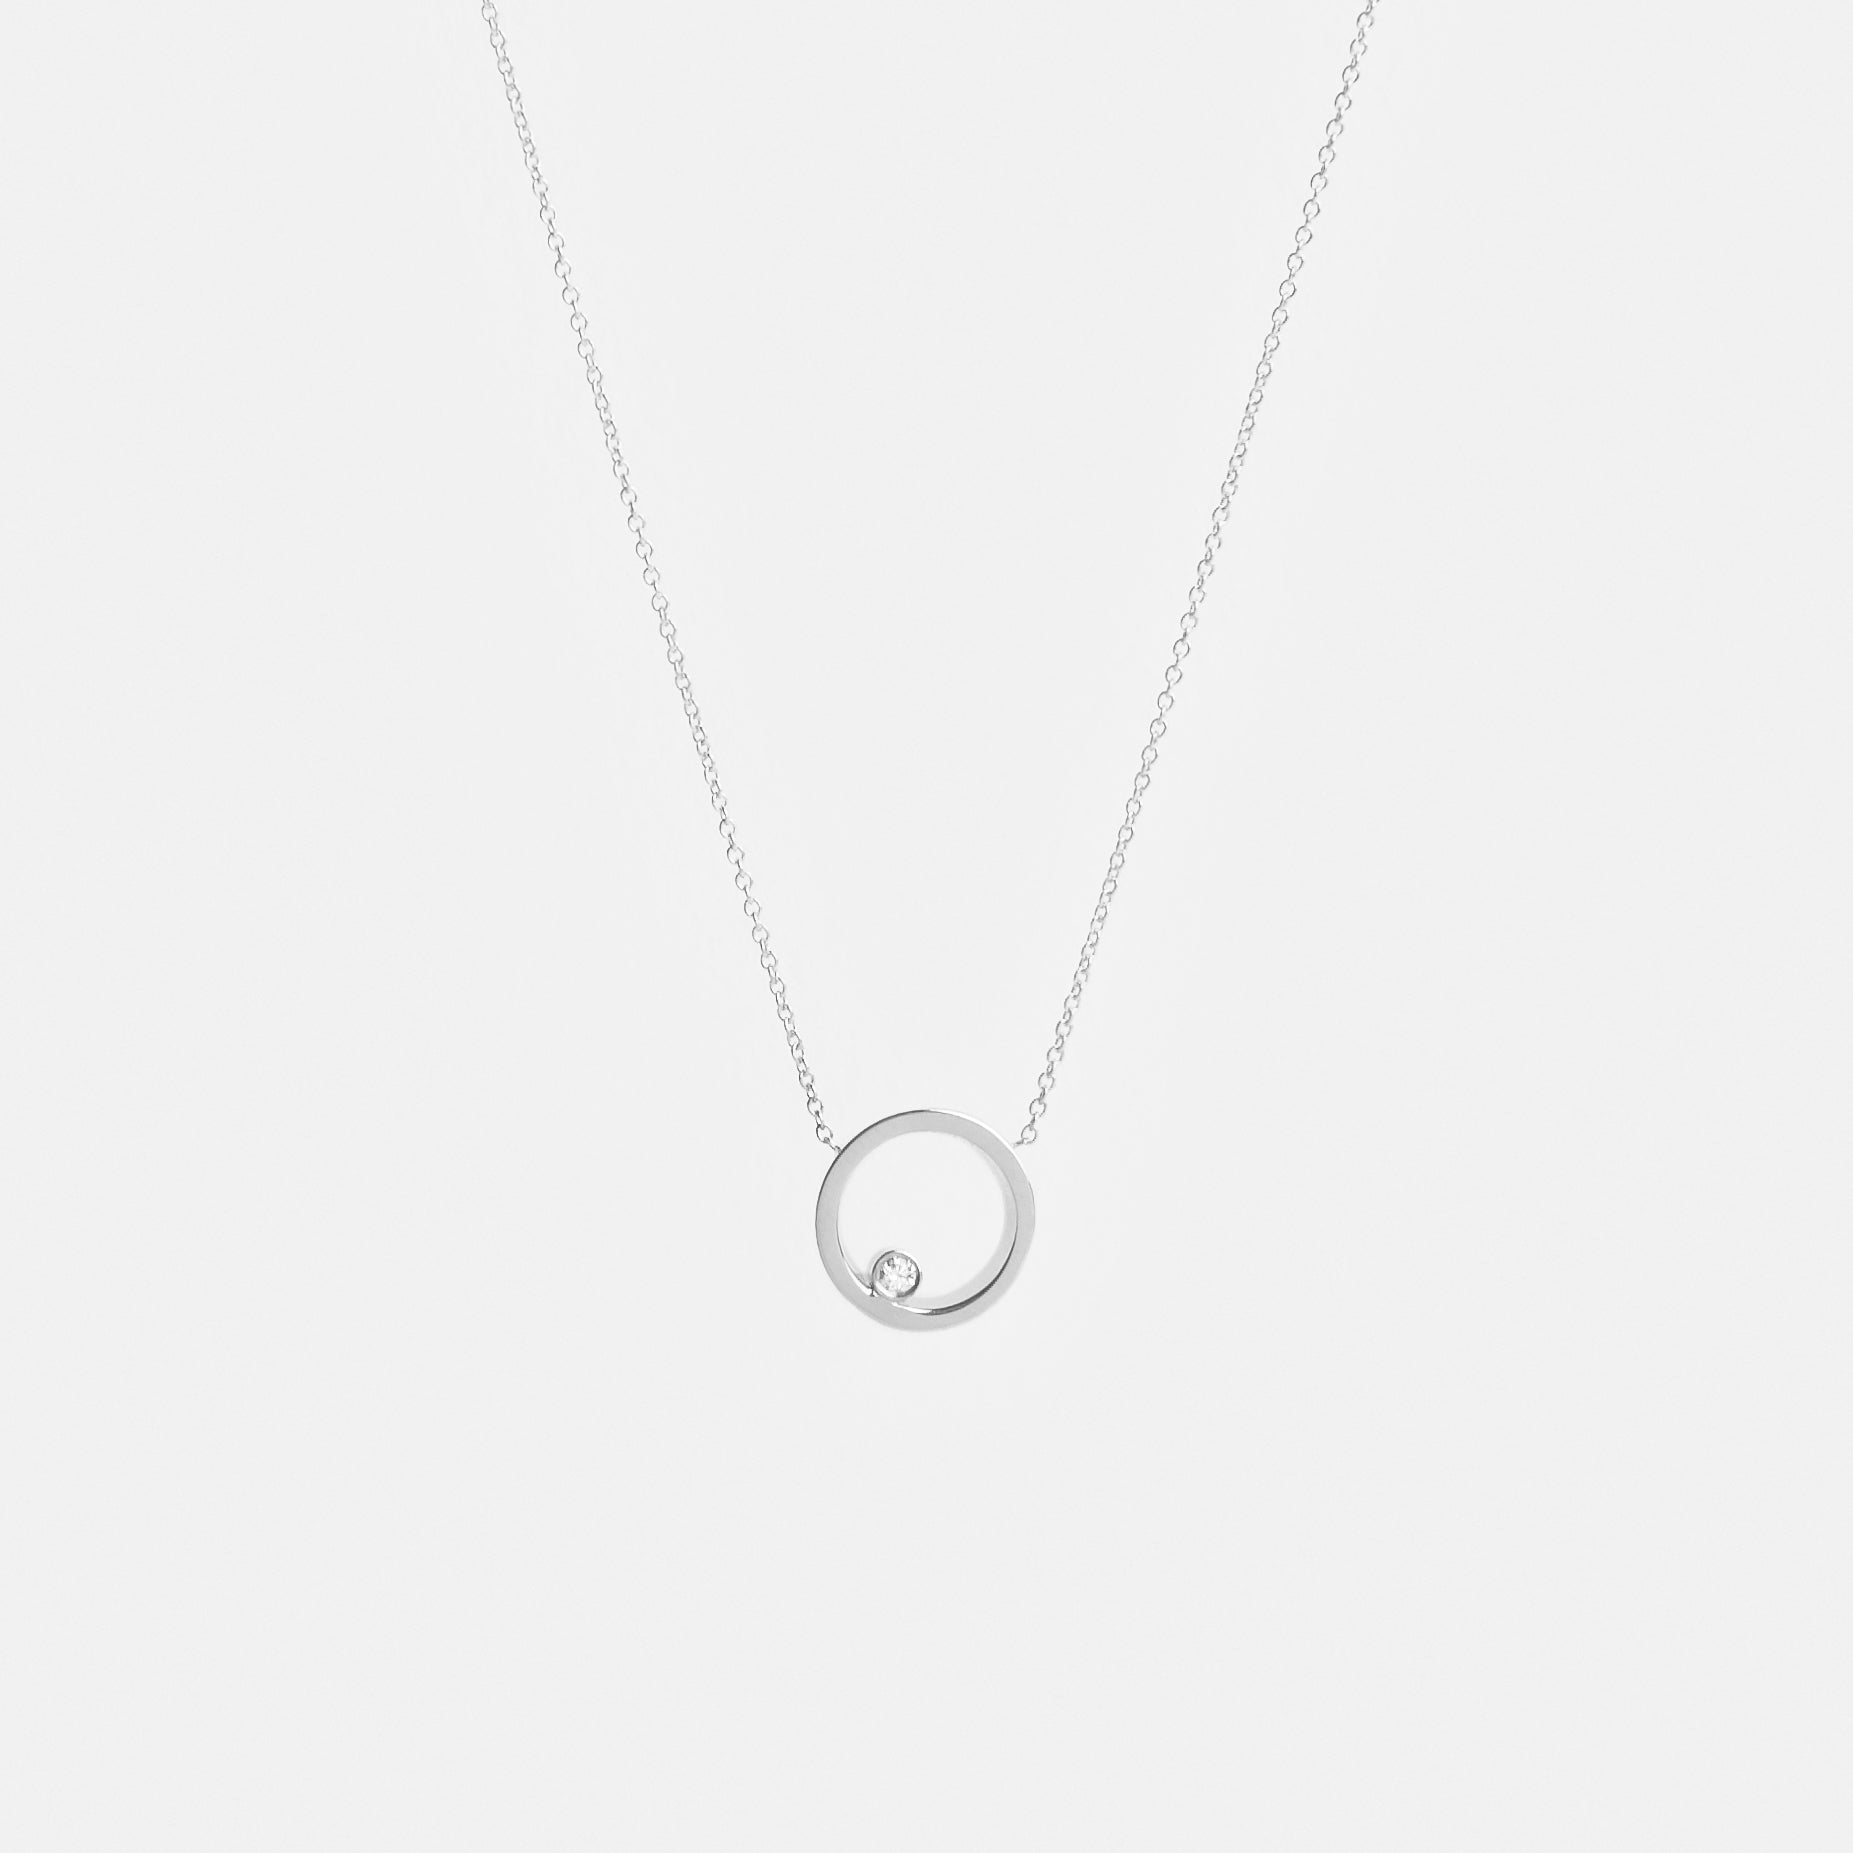 Ila Unconventional Necklace in Sterling Silver set with White Diamond By SHW Fine Jewelry NYC